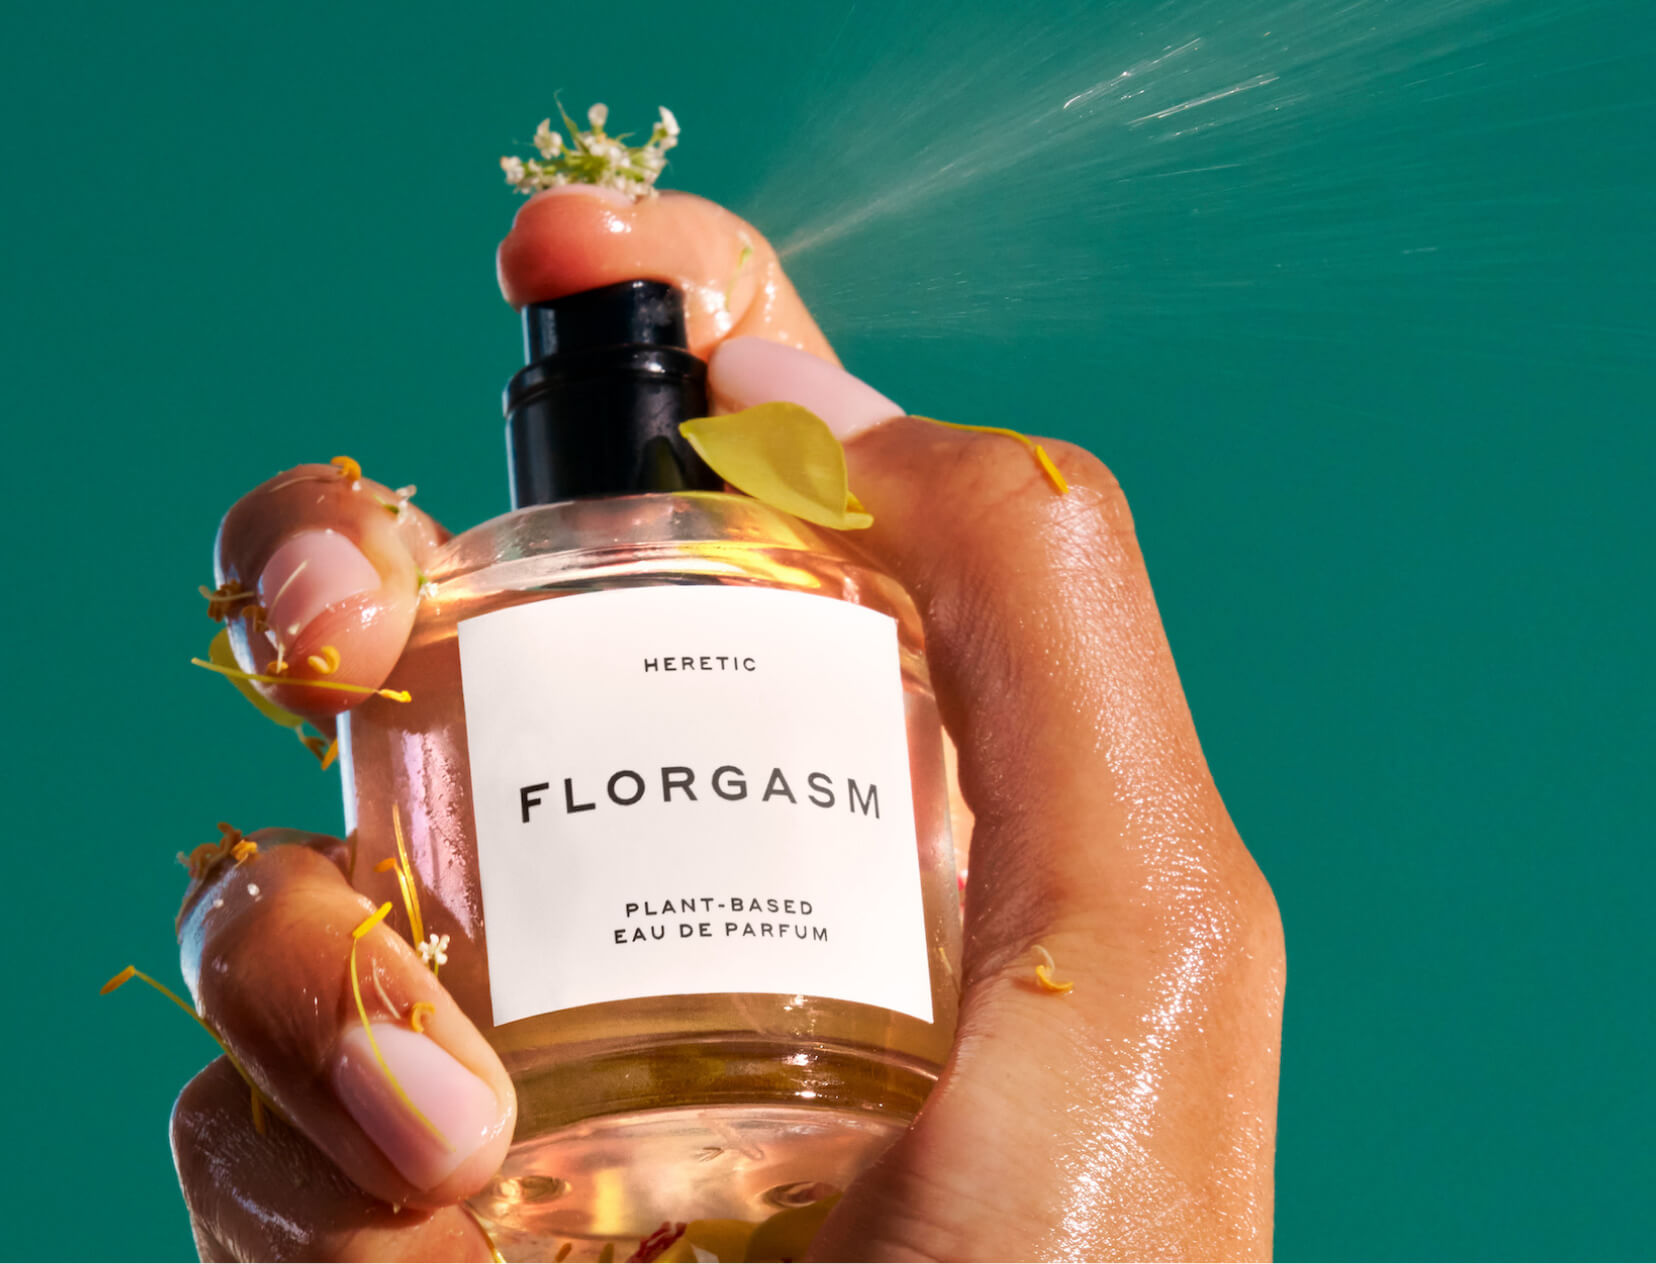 Clean Perfume: The Last Frontier in Clean Beauty